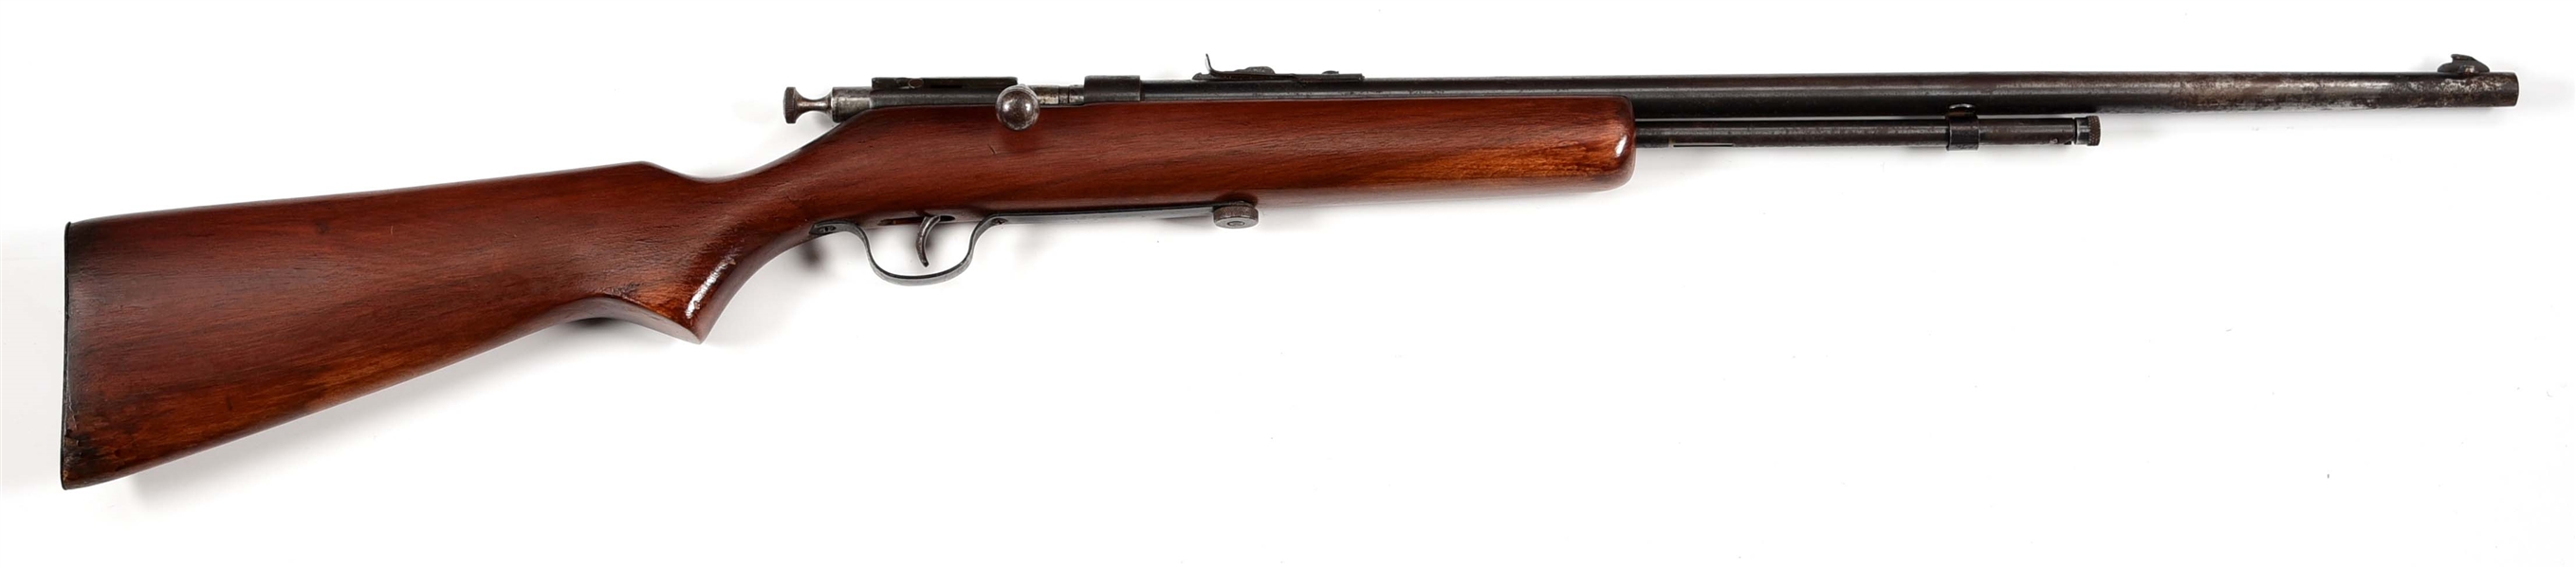 (C) H.W. COOEY BOLT ACTION RIFLE.